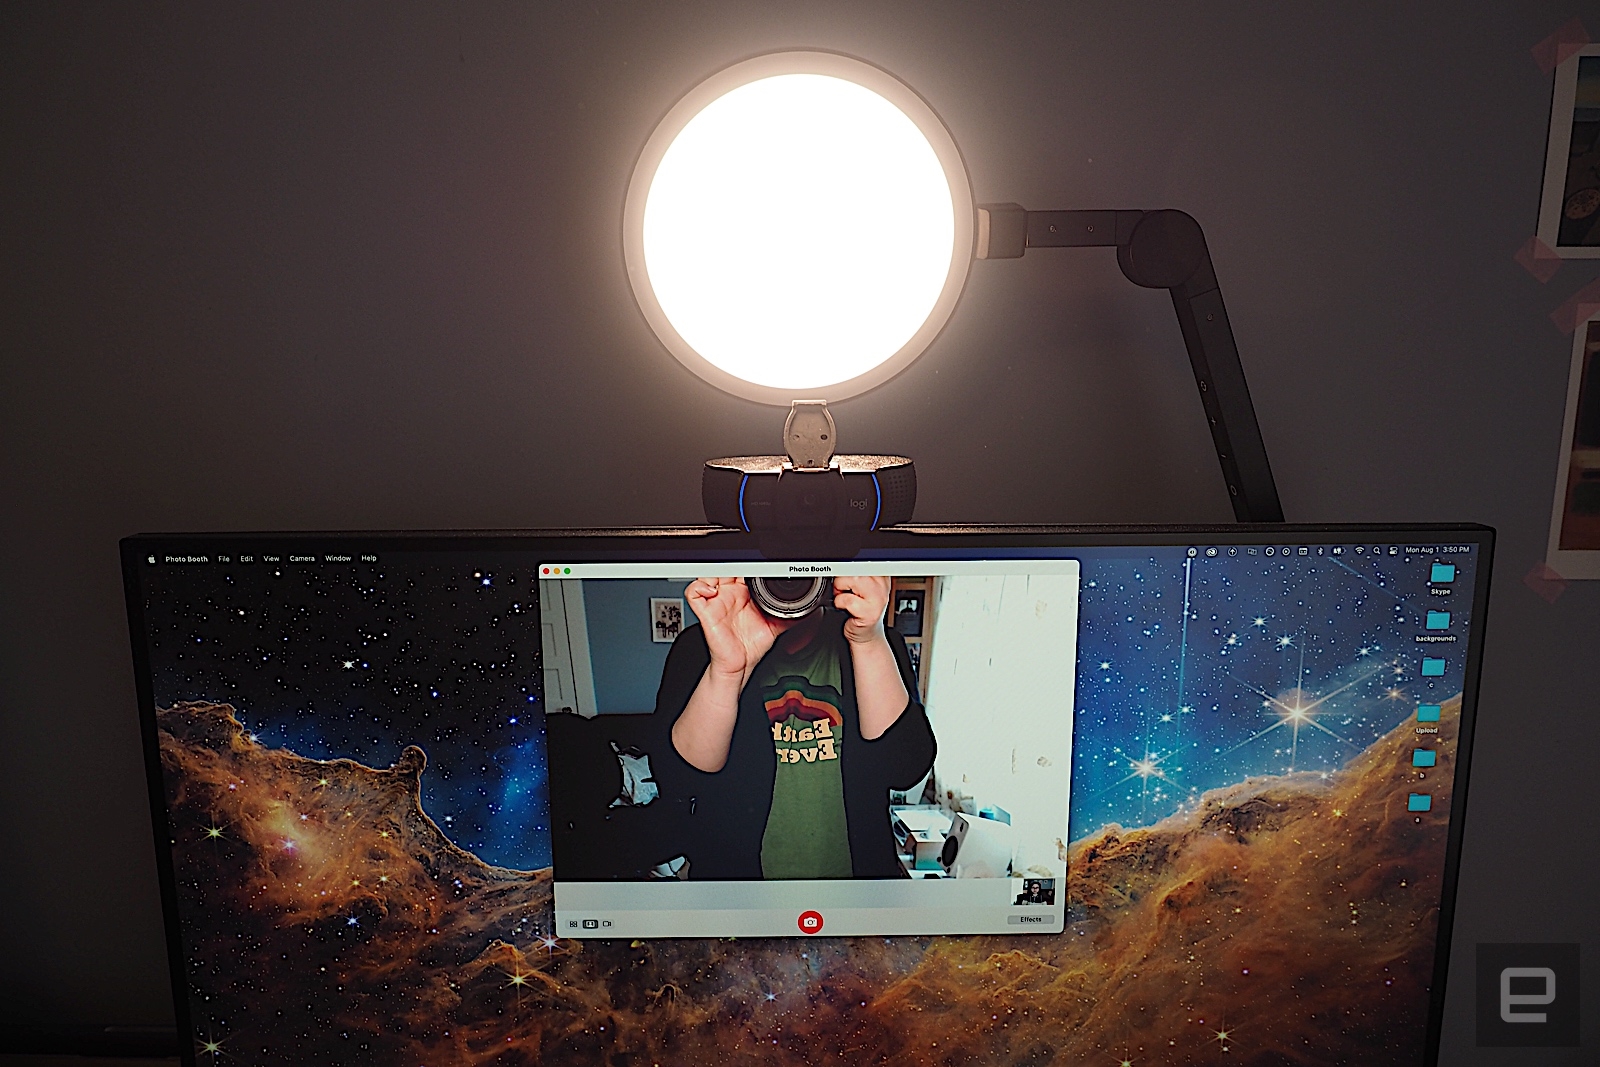 What we bought: This LED desk lamp gave me the best lighting for video calls | DeviceDaily.com